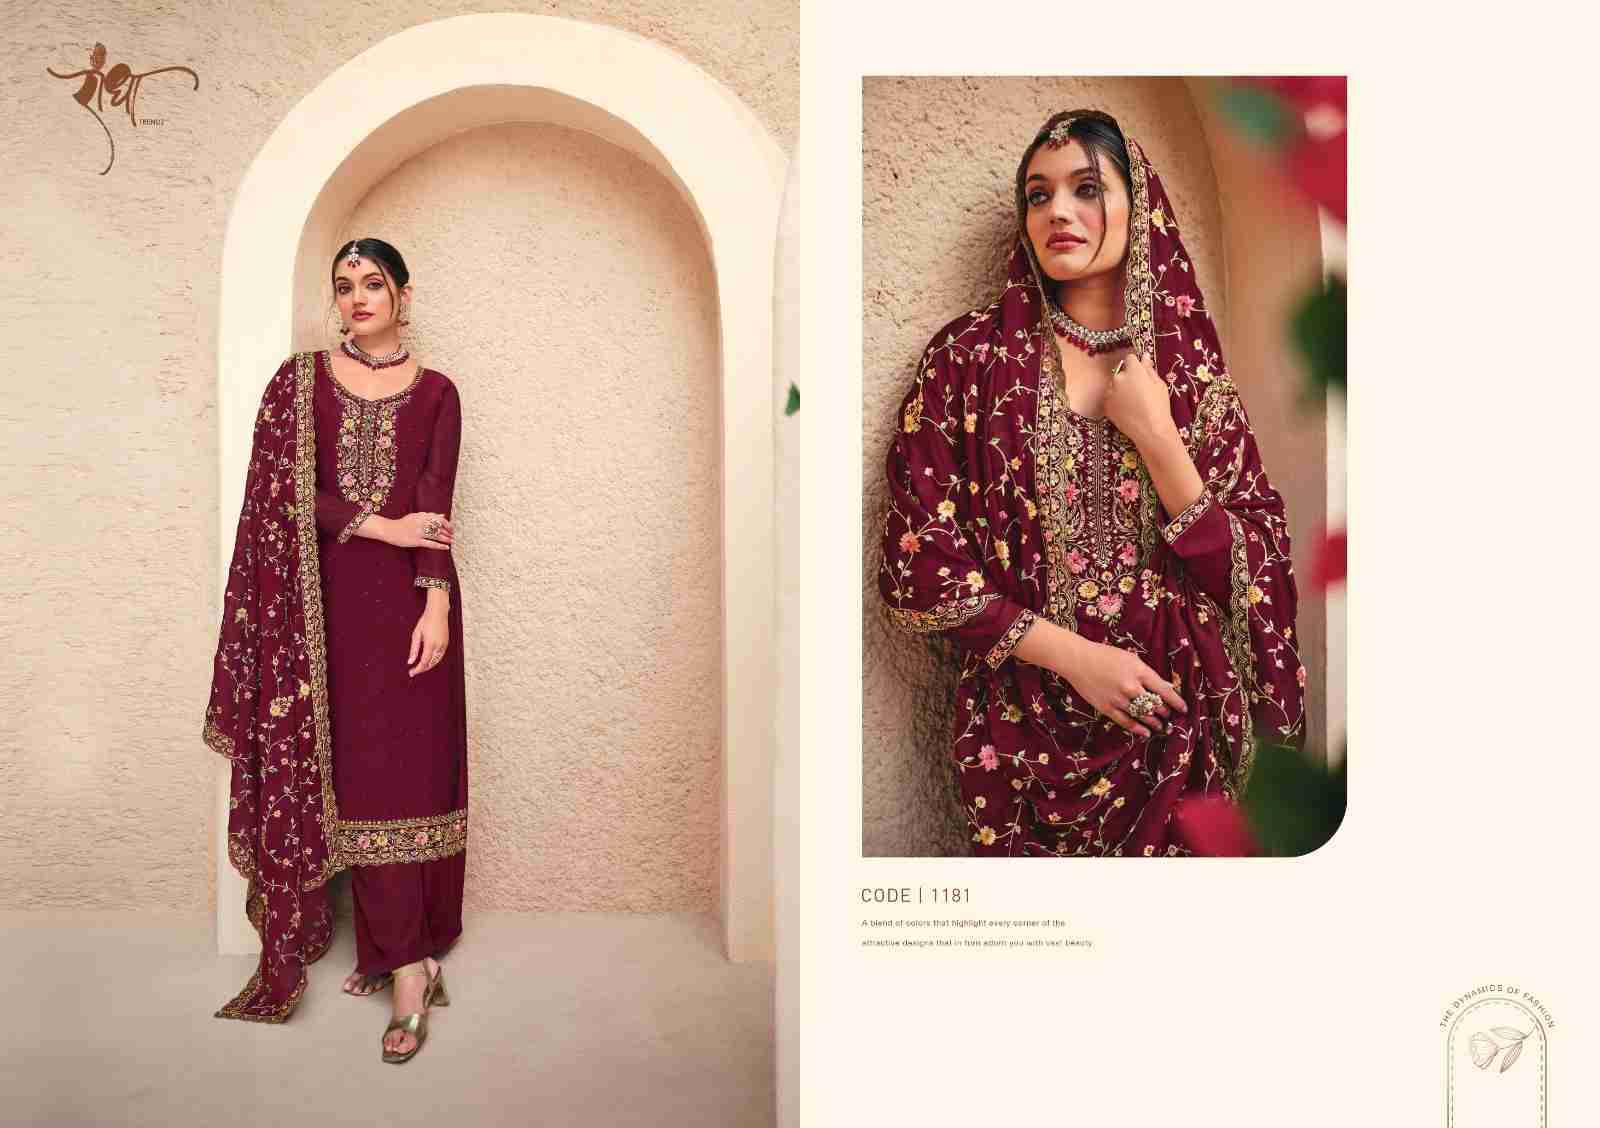 Suhagan By Radha Trends 1181 To 1184 Series Beautiful Festive Suits Colorful Stylish Fancy Casual Wear & Ethnic Wear Georgette Embroidered Dresses At Wholesale Price